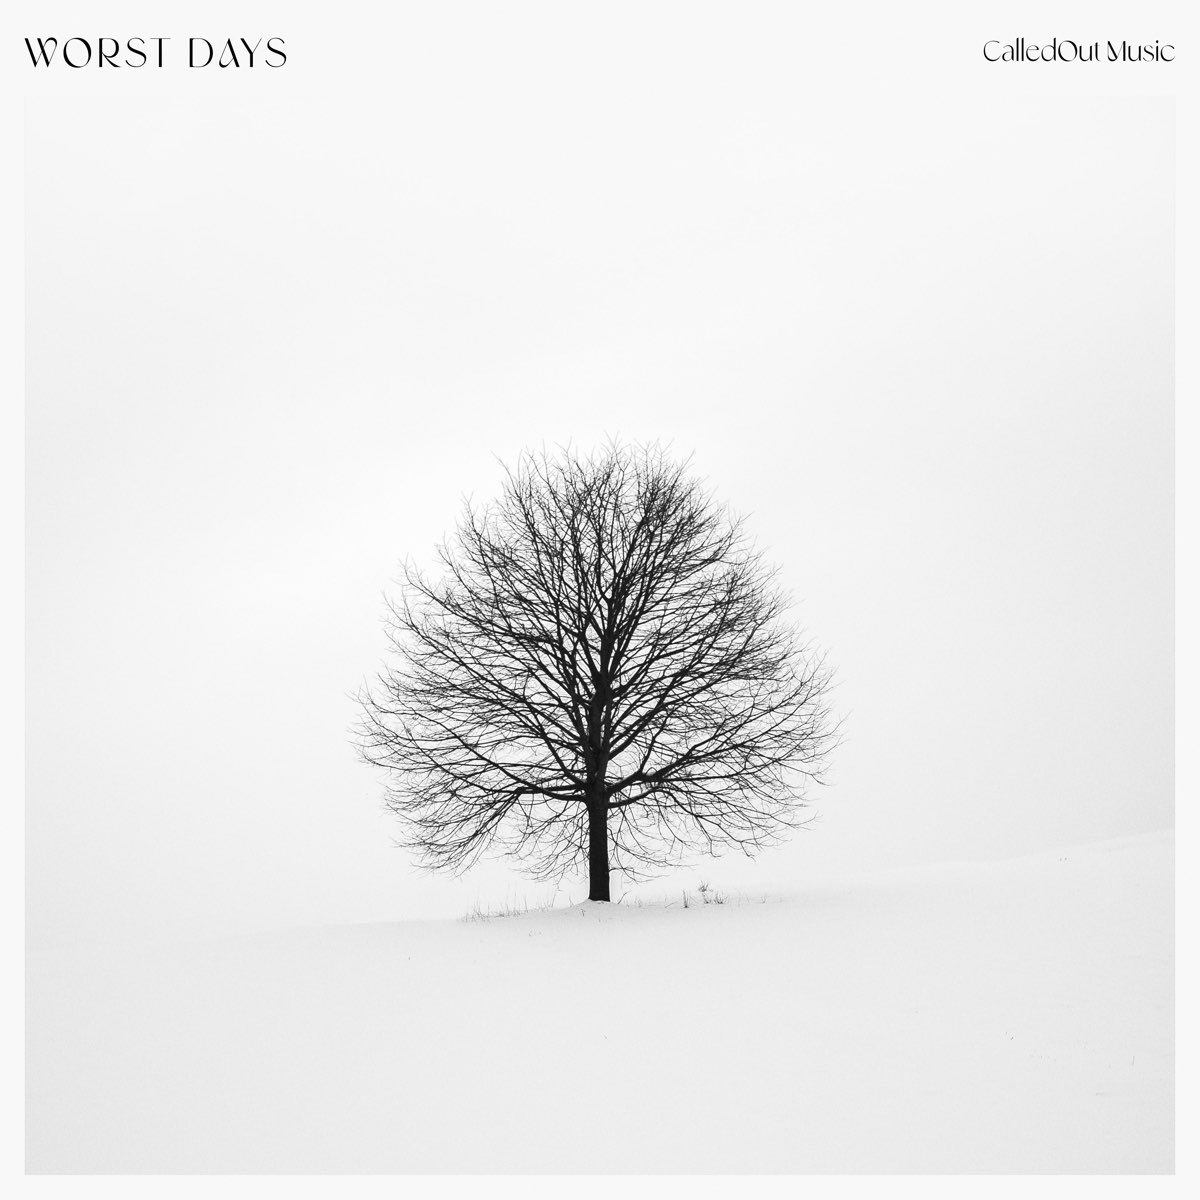 ‎Worst Days Single by CalledOut Music on Apple Music